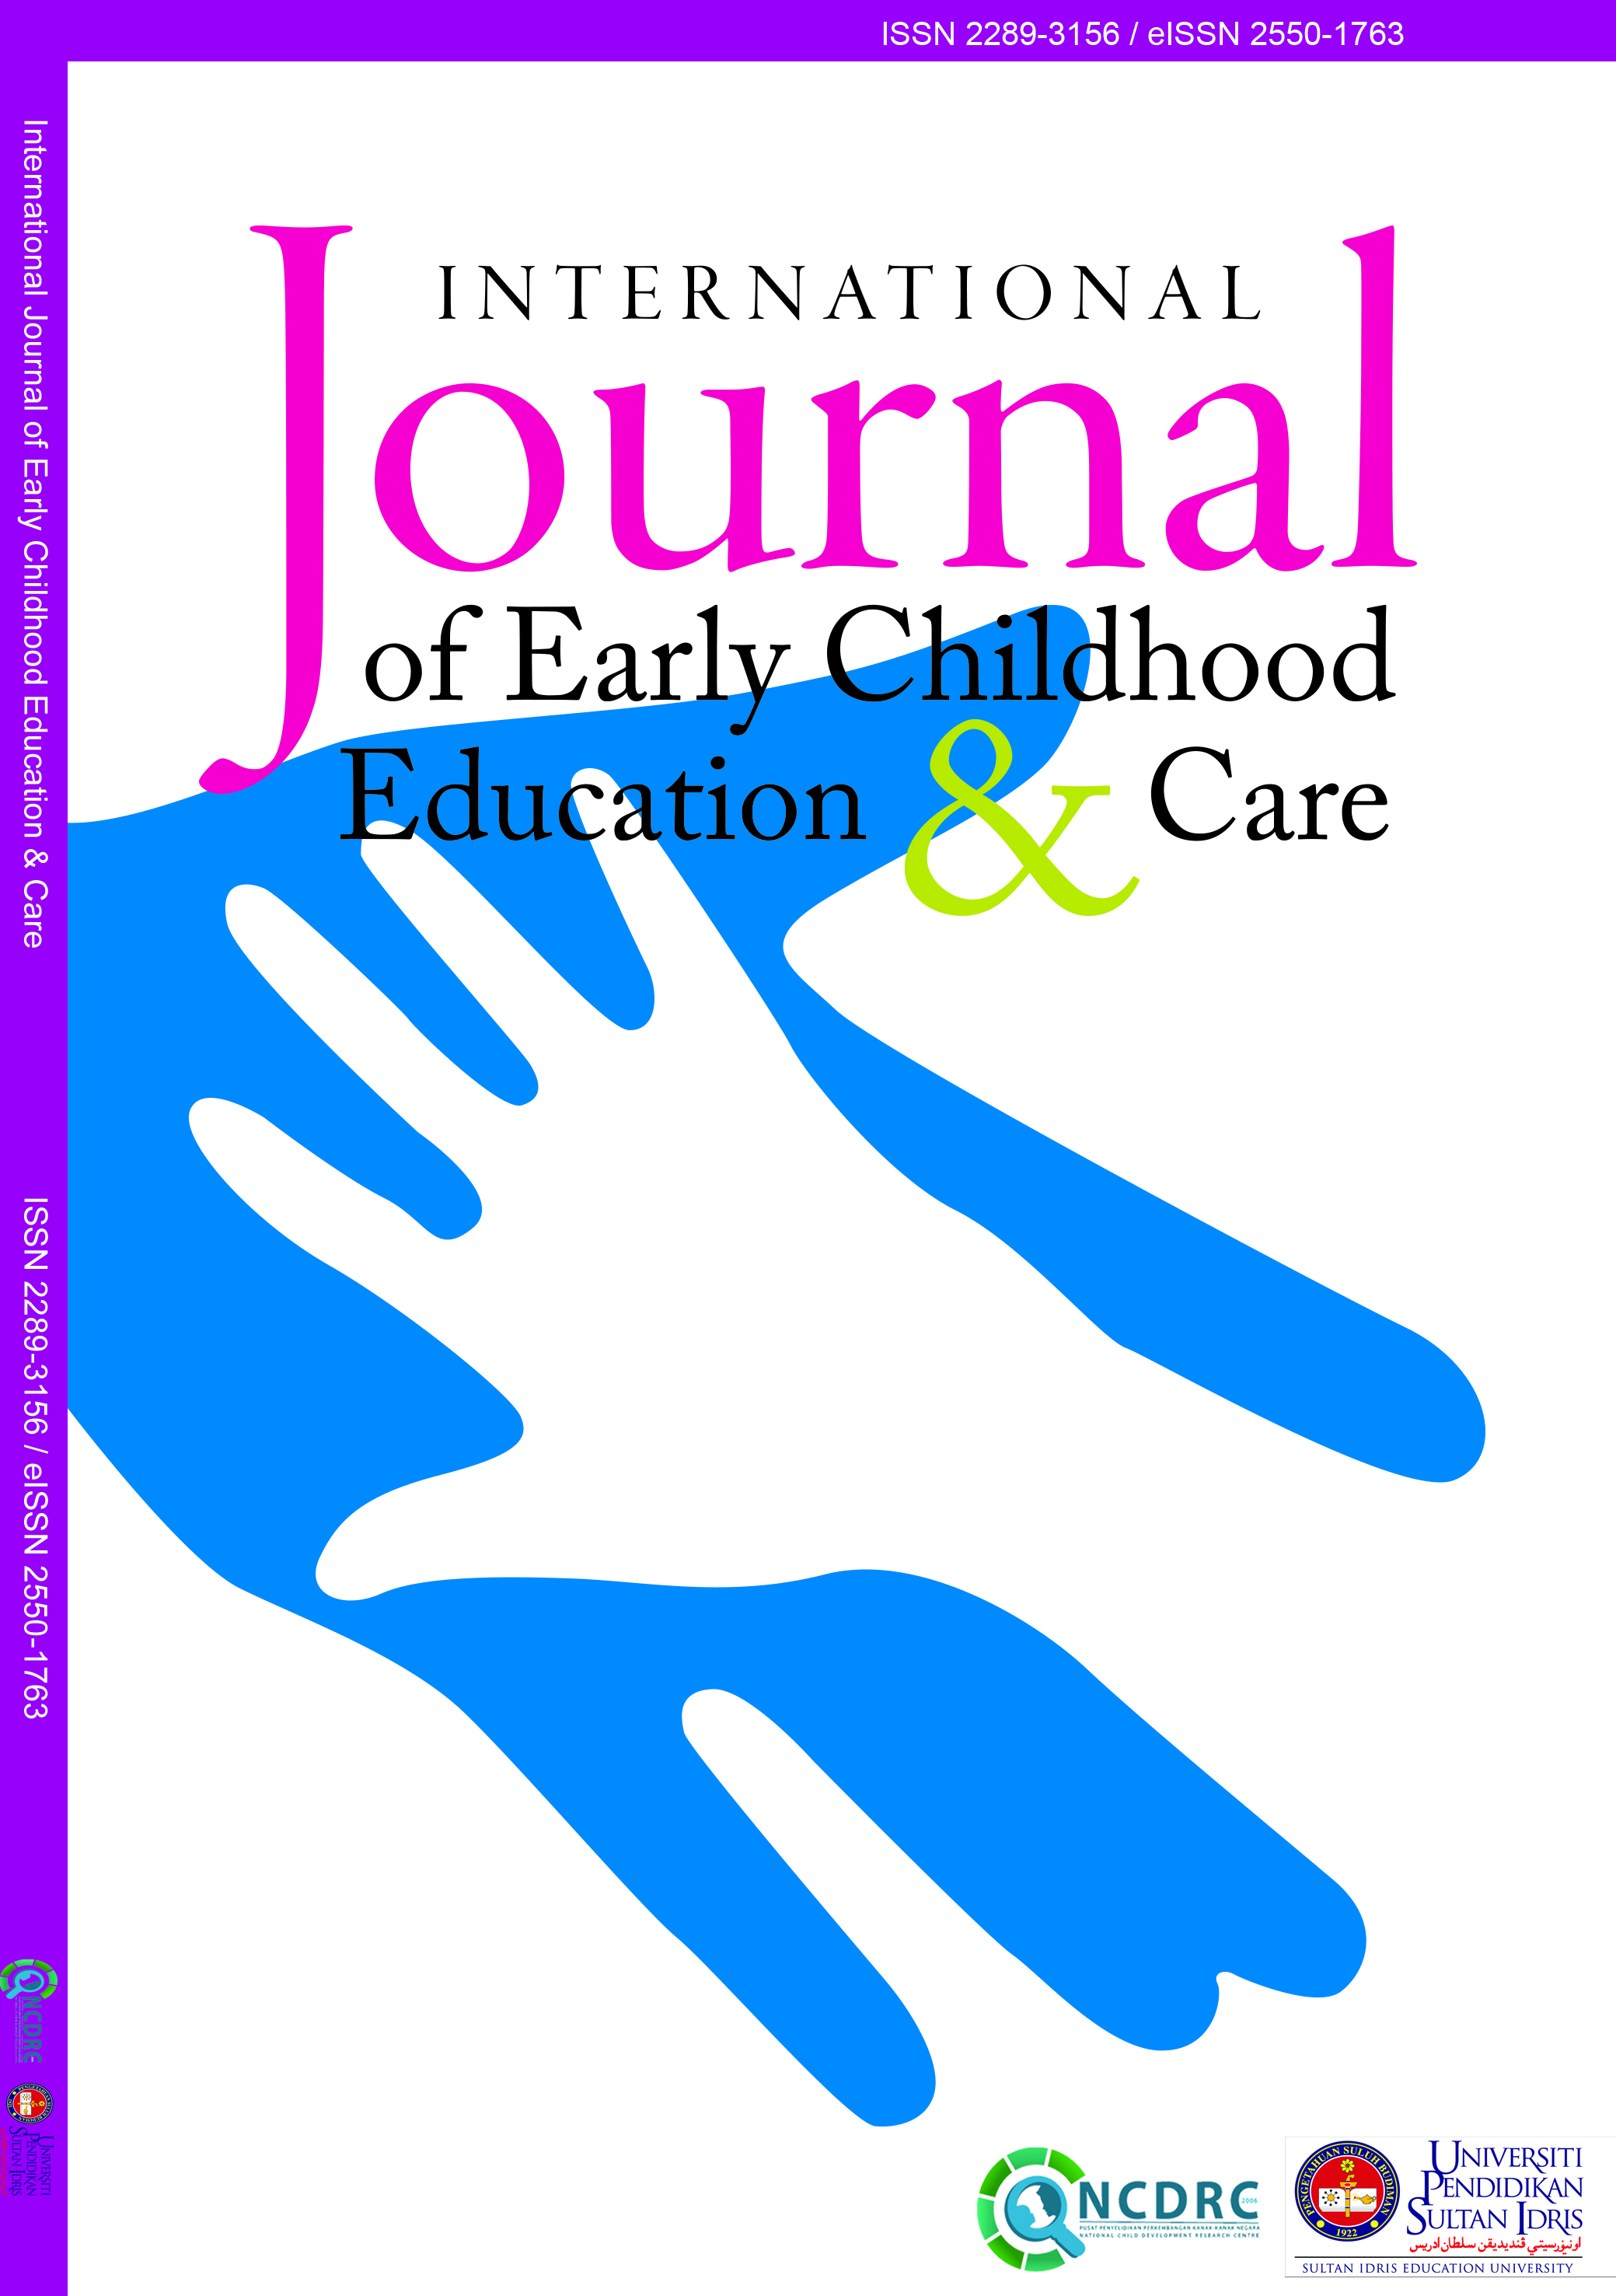 					View Vol. 4 (2015): International Journal of Early Childhood Education and Care
				